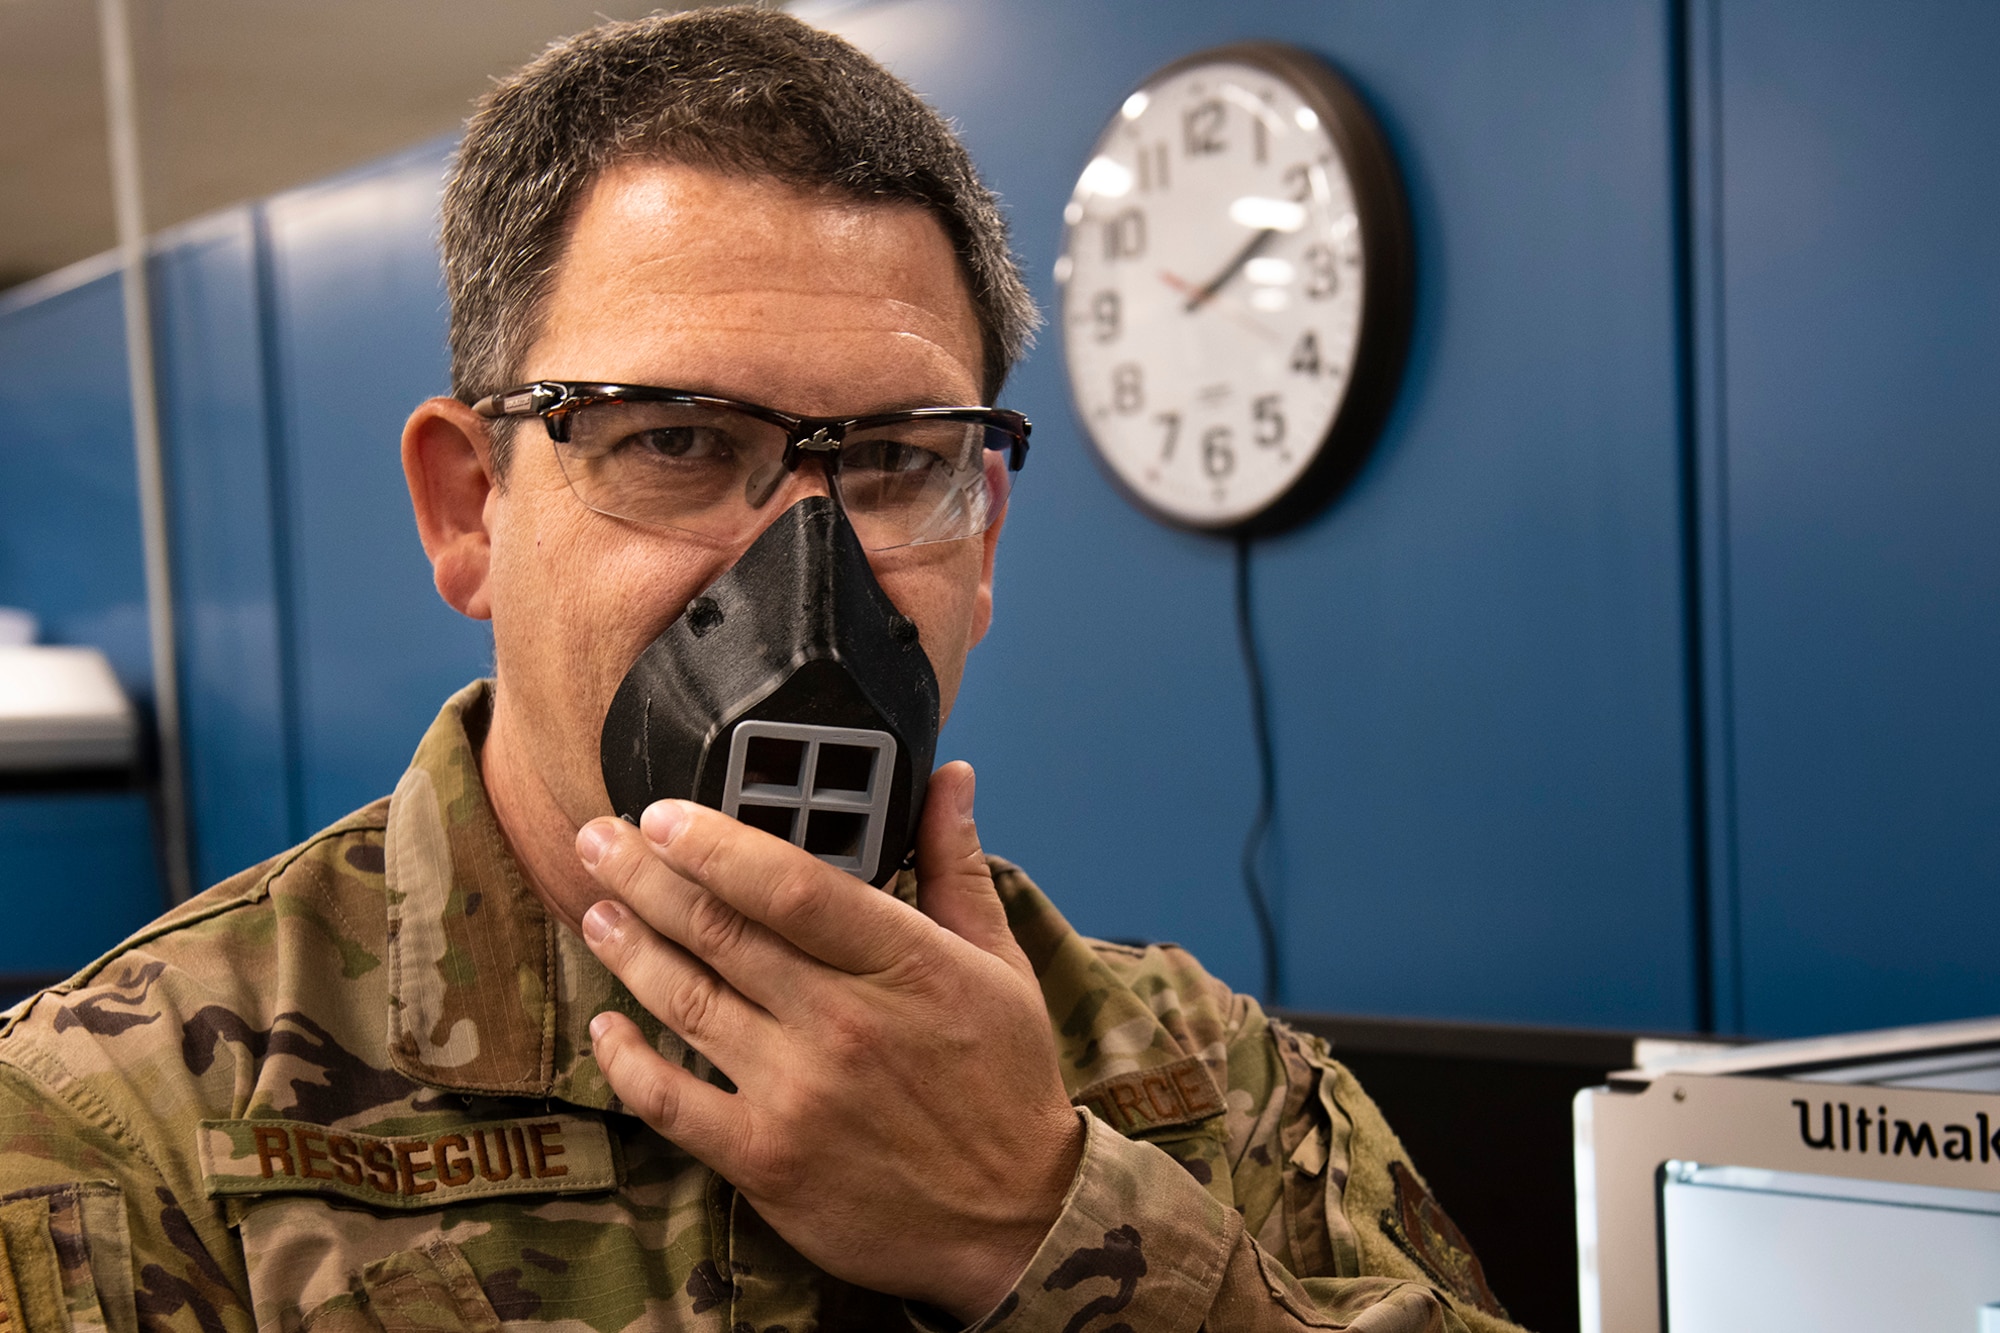 Tech. Sgt. Michael Resseguie, 919th Special Operations Maintenance Squadron metals technology craftsman, dons a 3D-printed face-covering created by the metals technology shop at Duke Field, Florida, June 23, 2020.